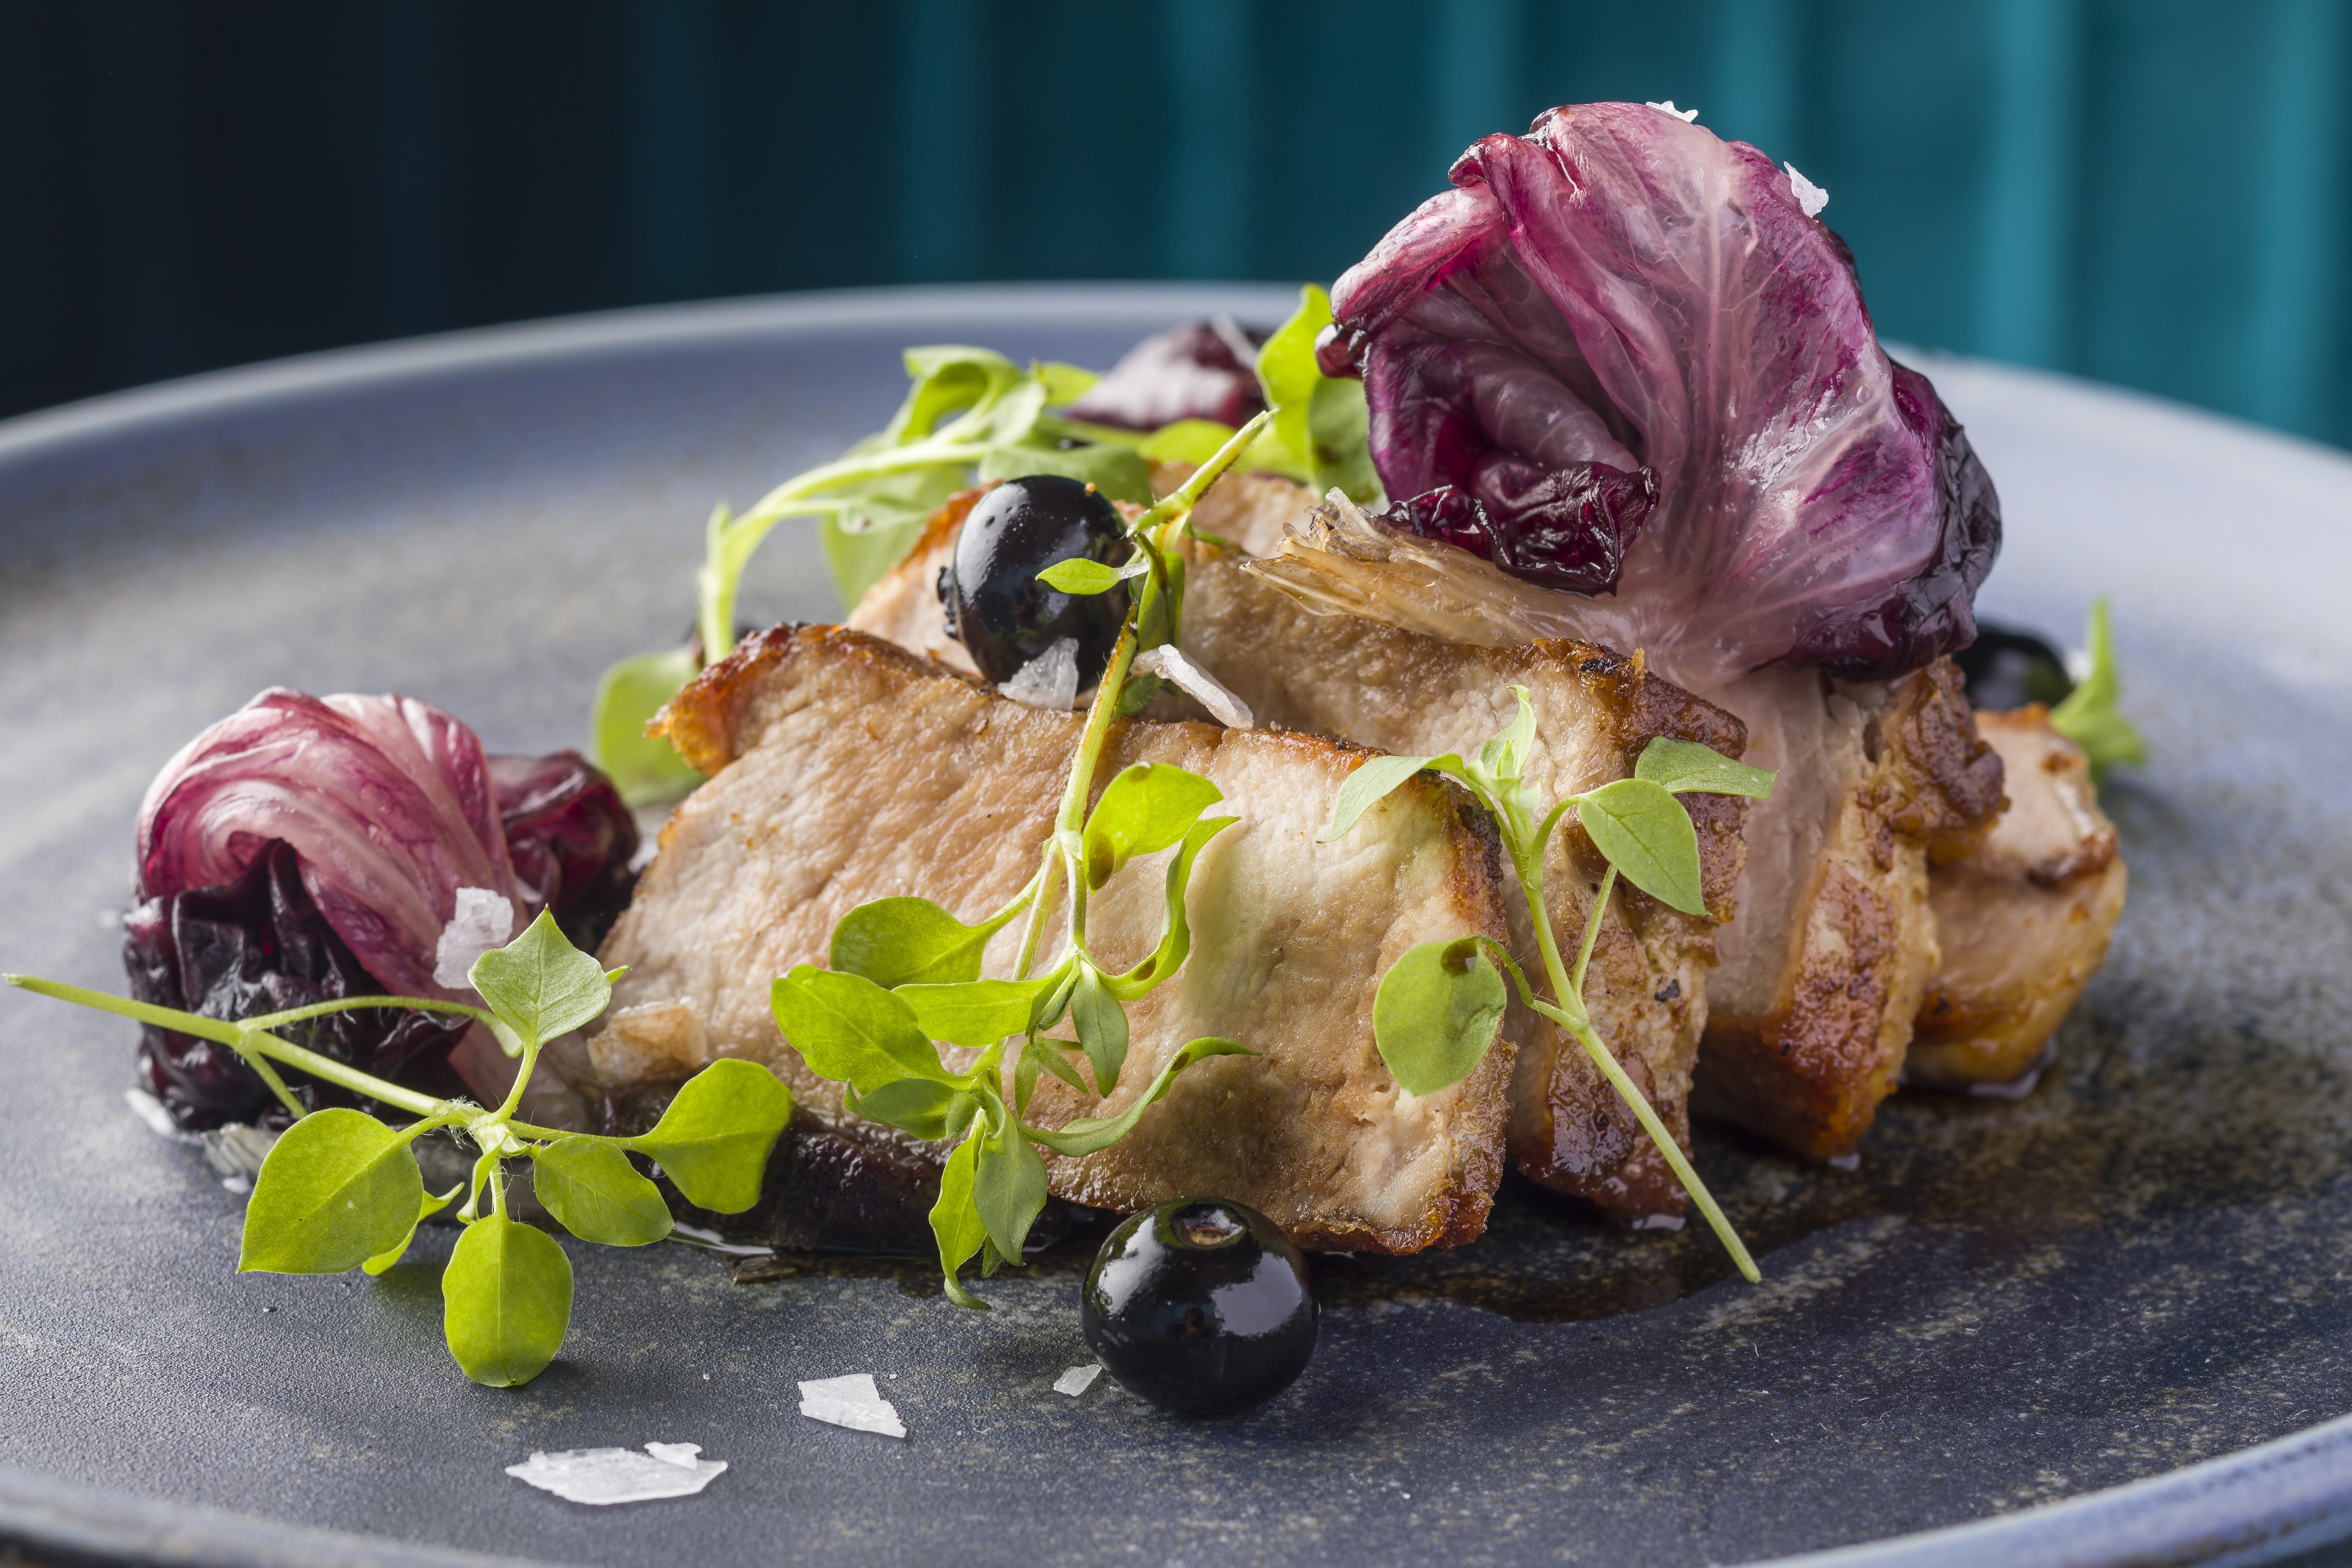 Pork loin with radicchio purée and fermented blue berries from Hue. Photos: Handouts